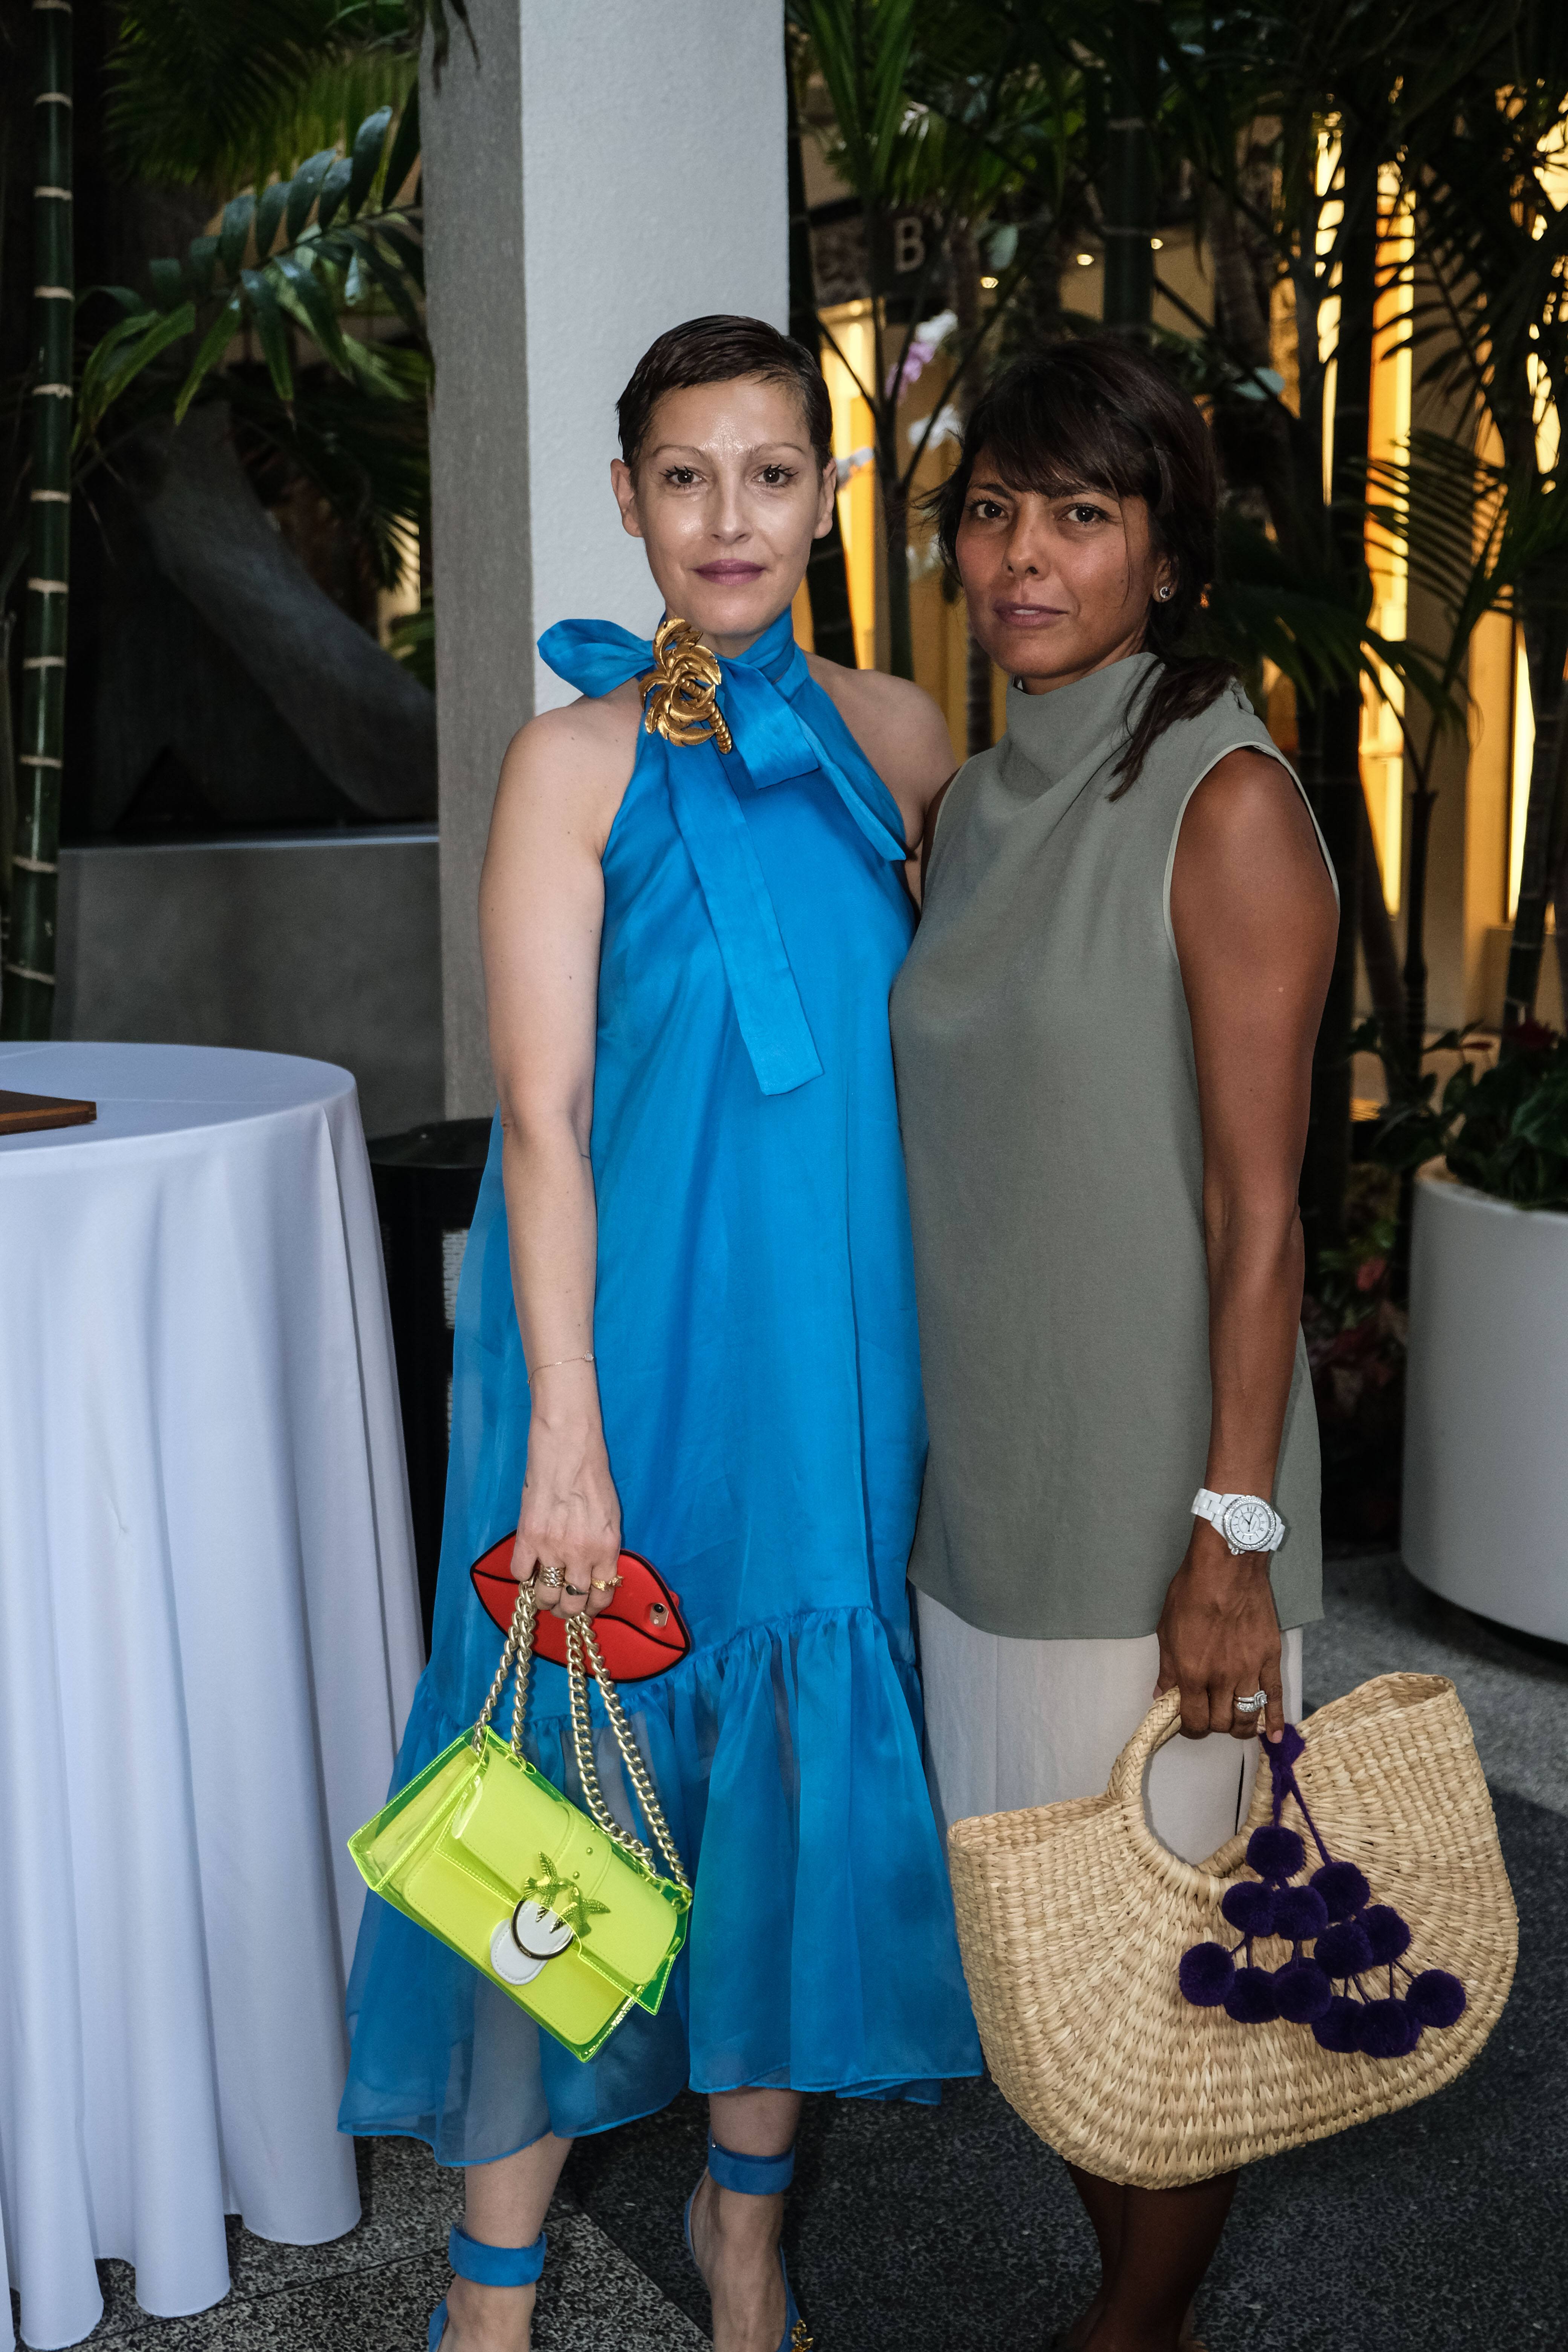 Angeles Almuna and Friend at Pinko Walk in the Garden Fashion Show